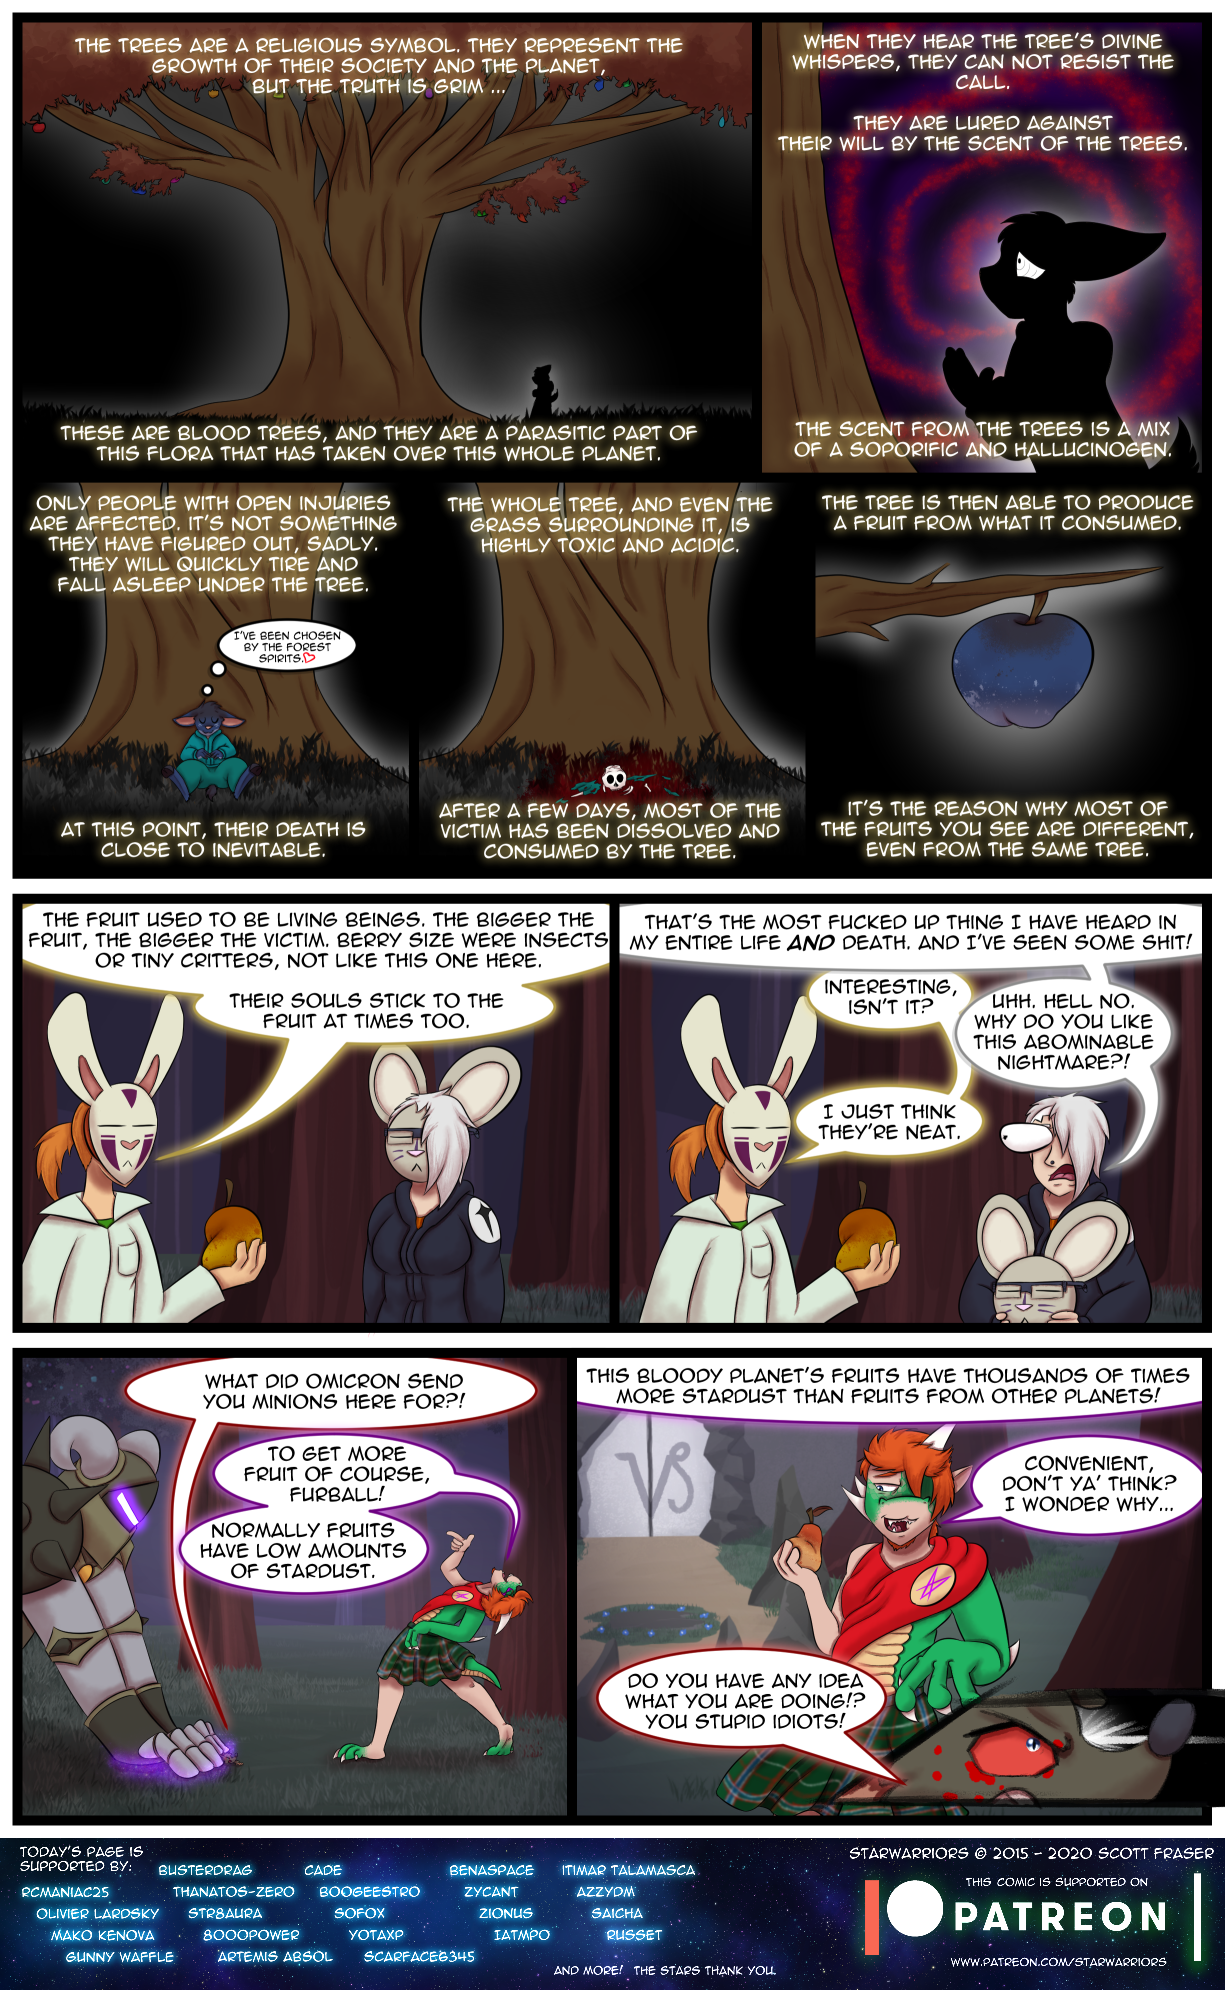 Ch5 Page 12 – Holy Trees